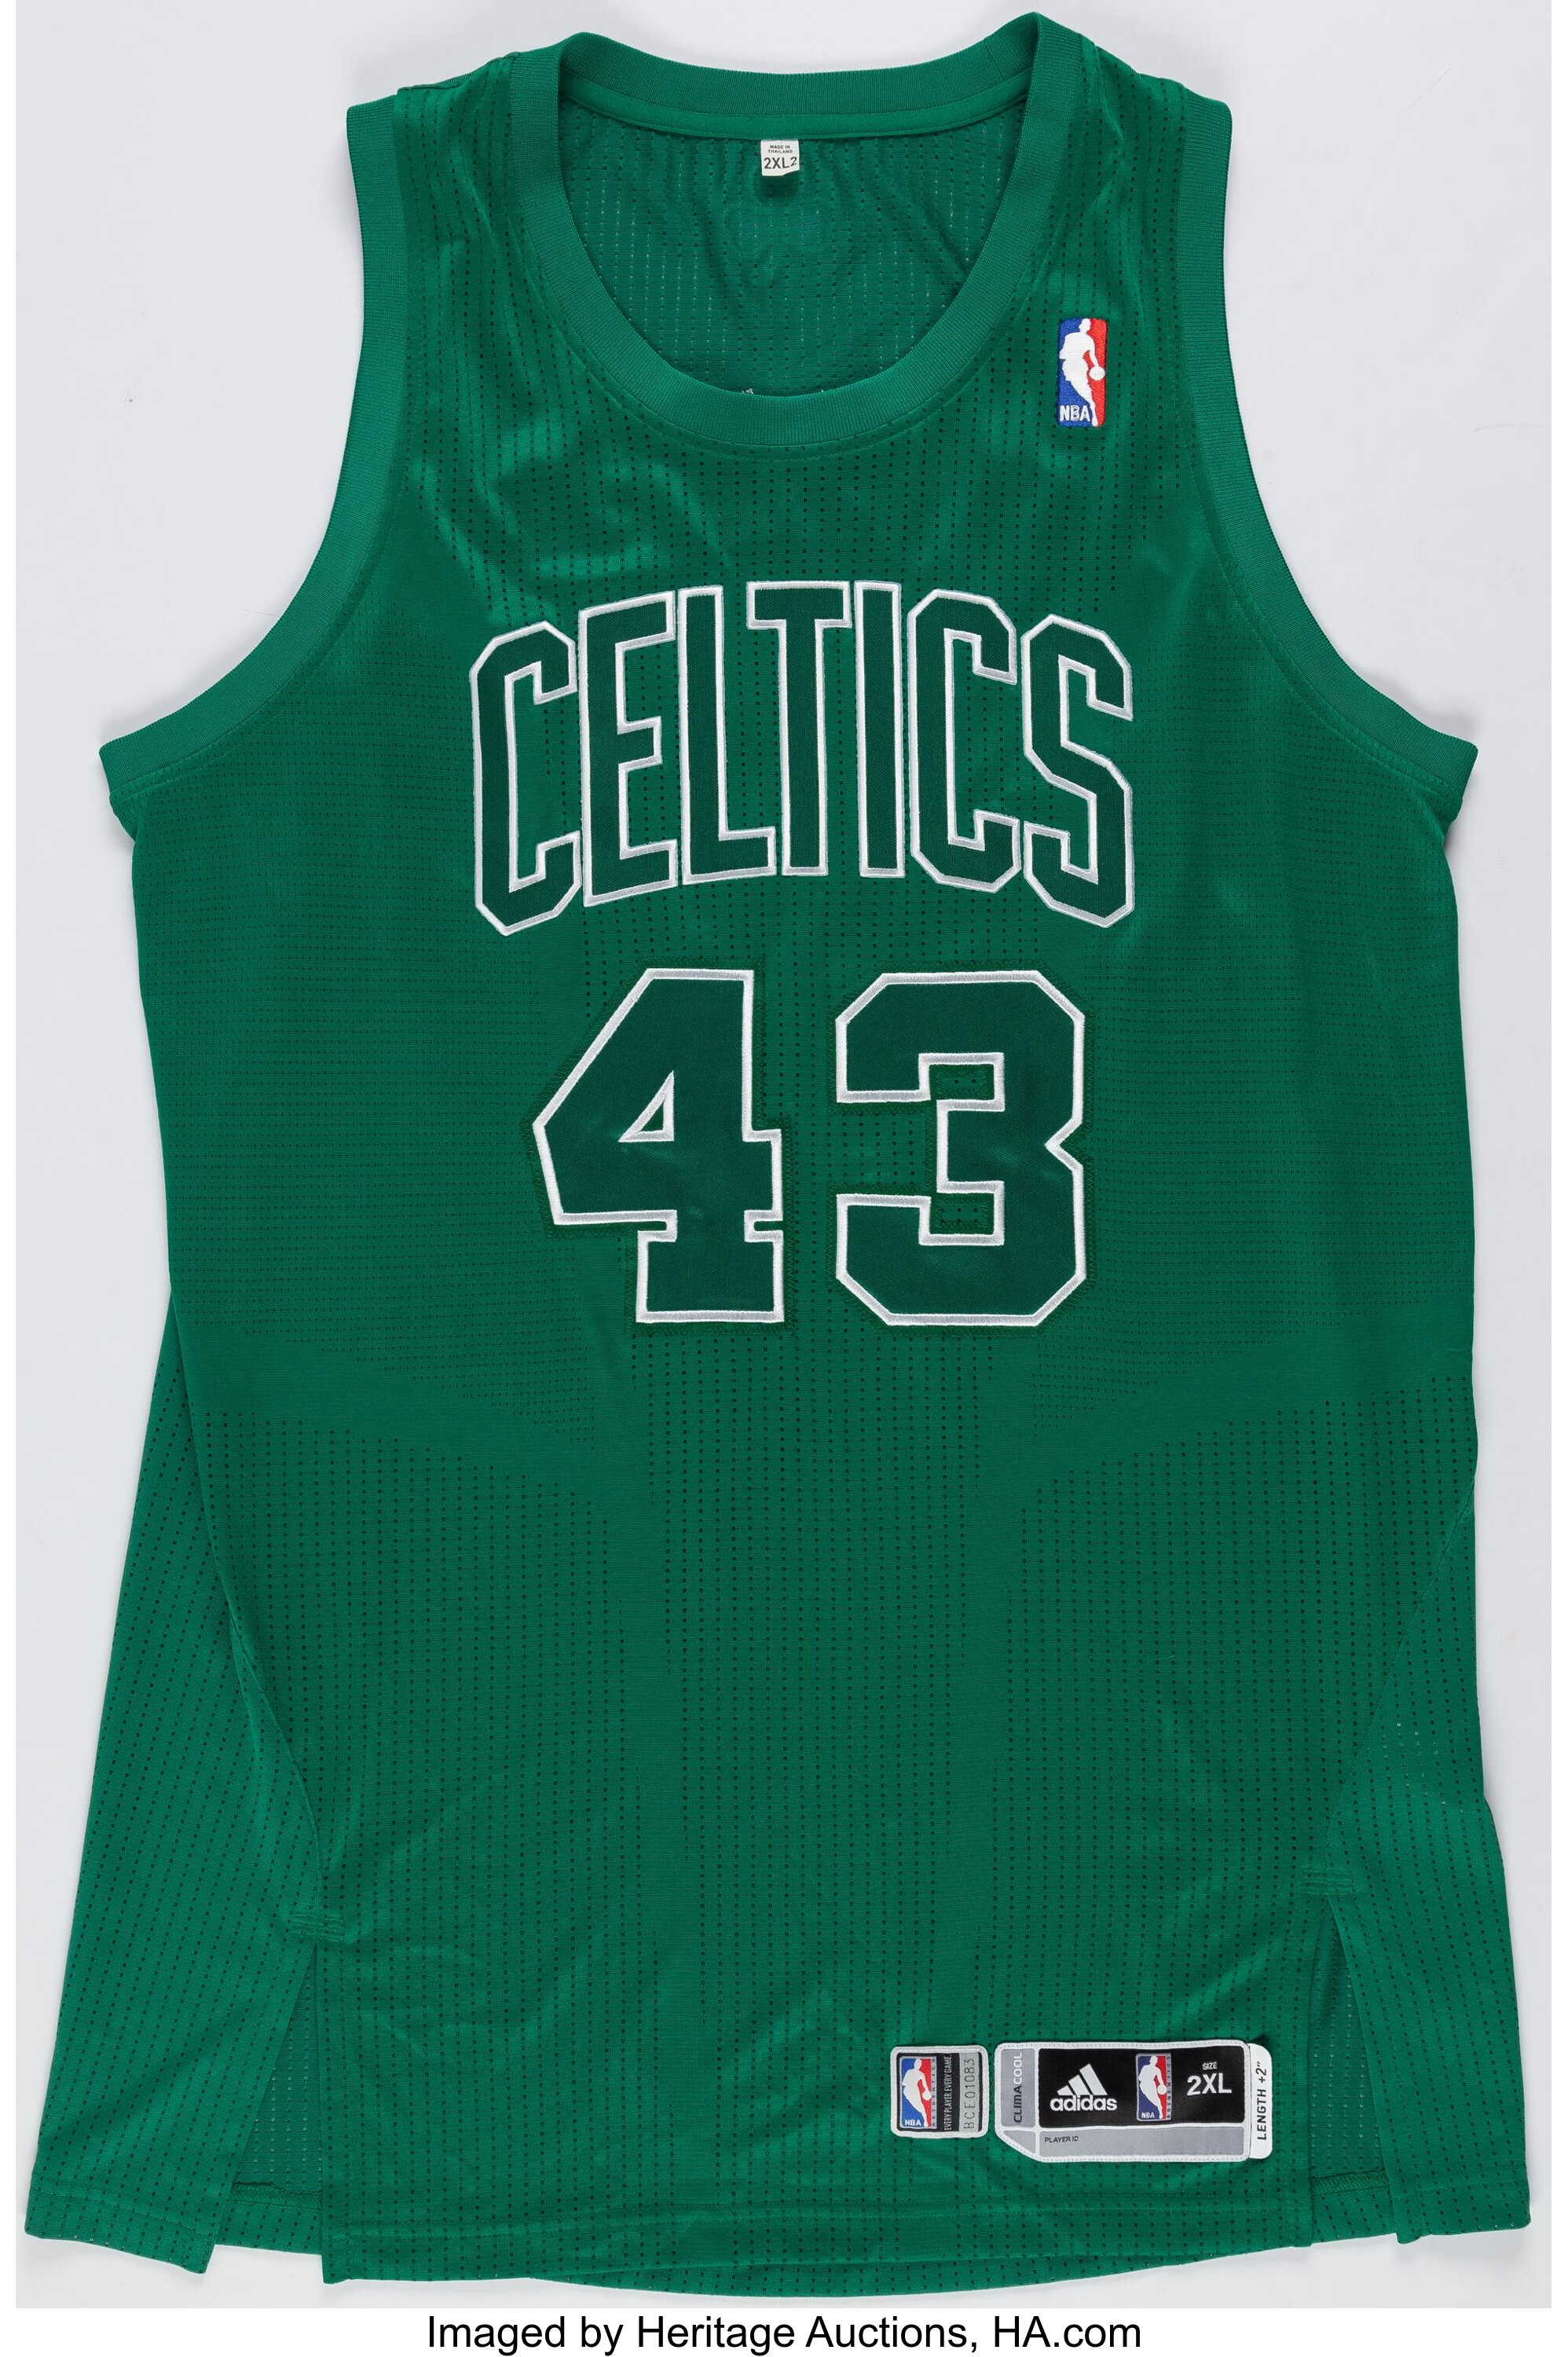 Christmas Day NBA jerseys unveiled for 2012 games